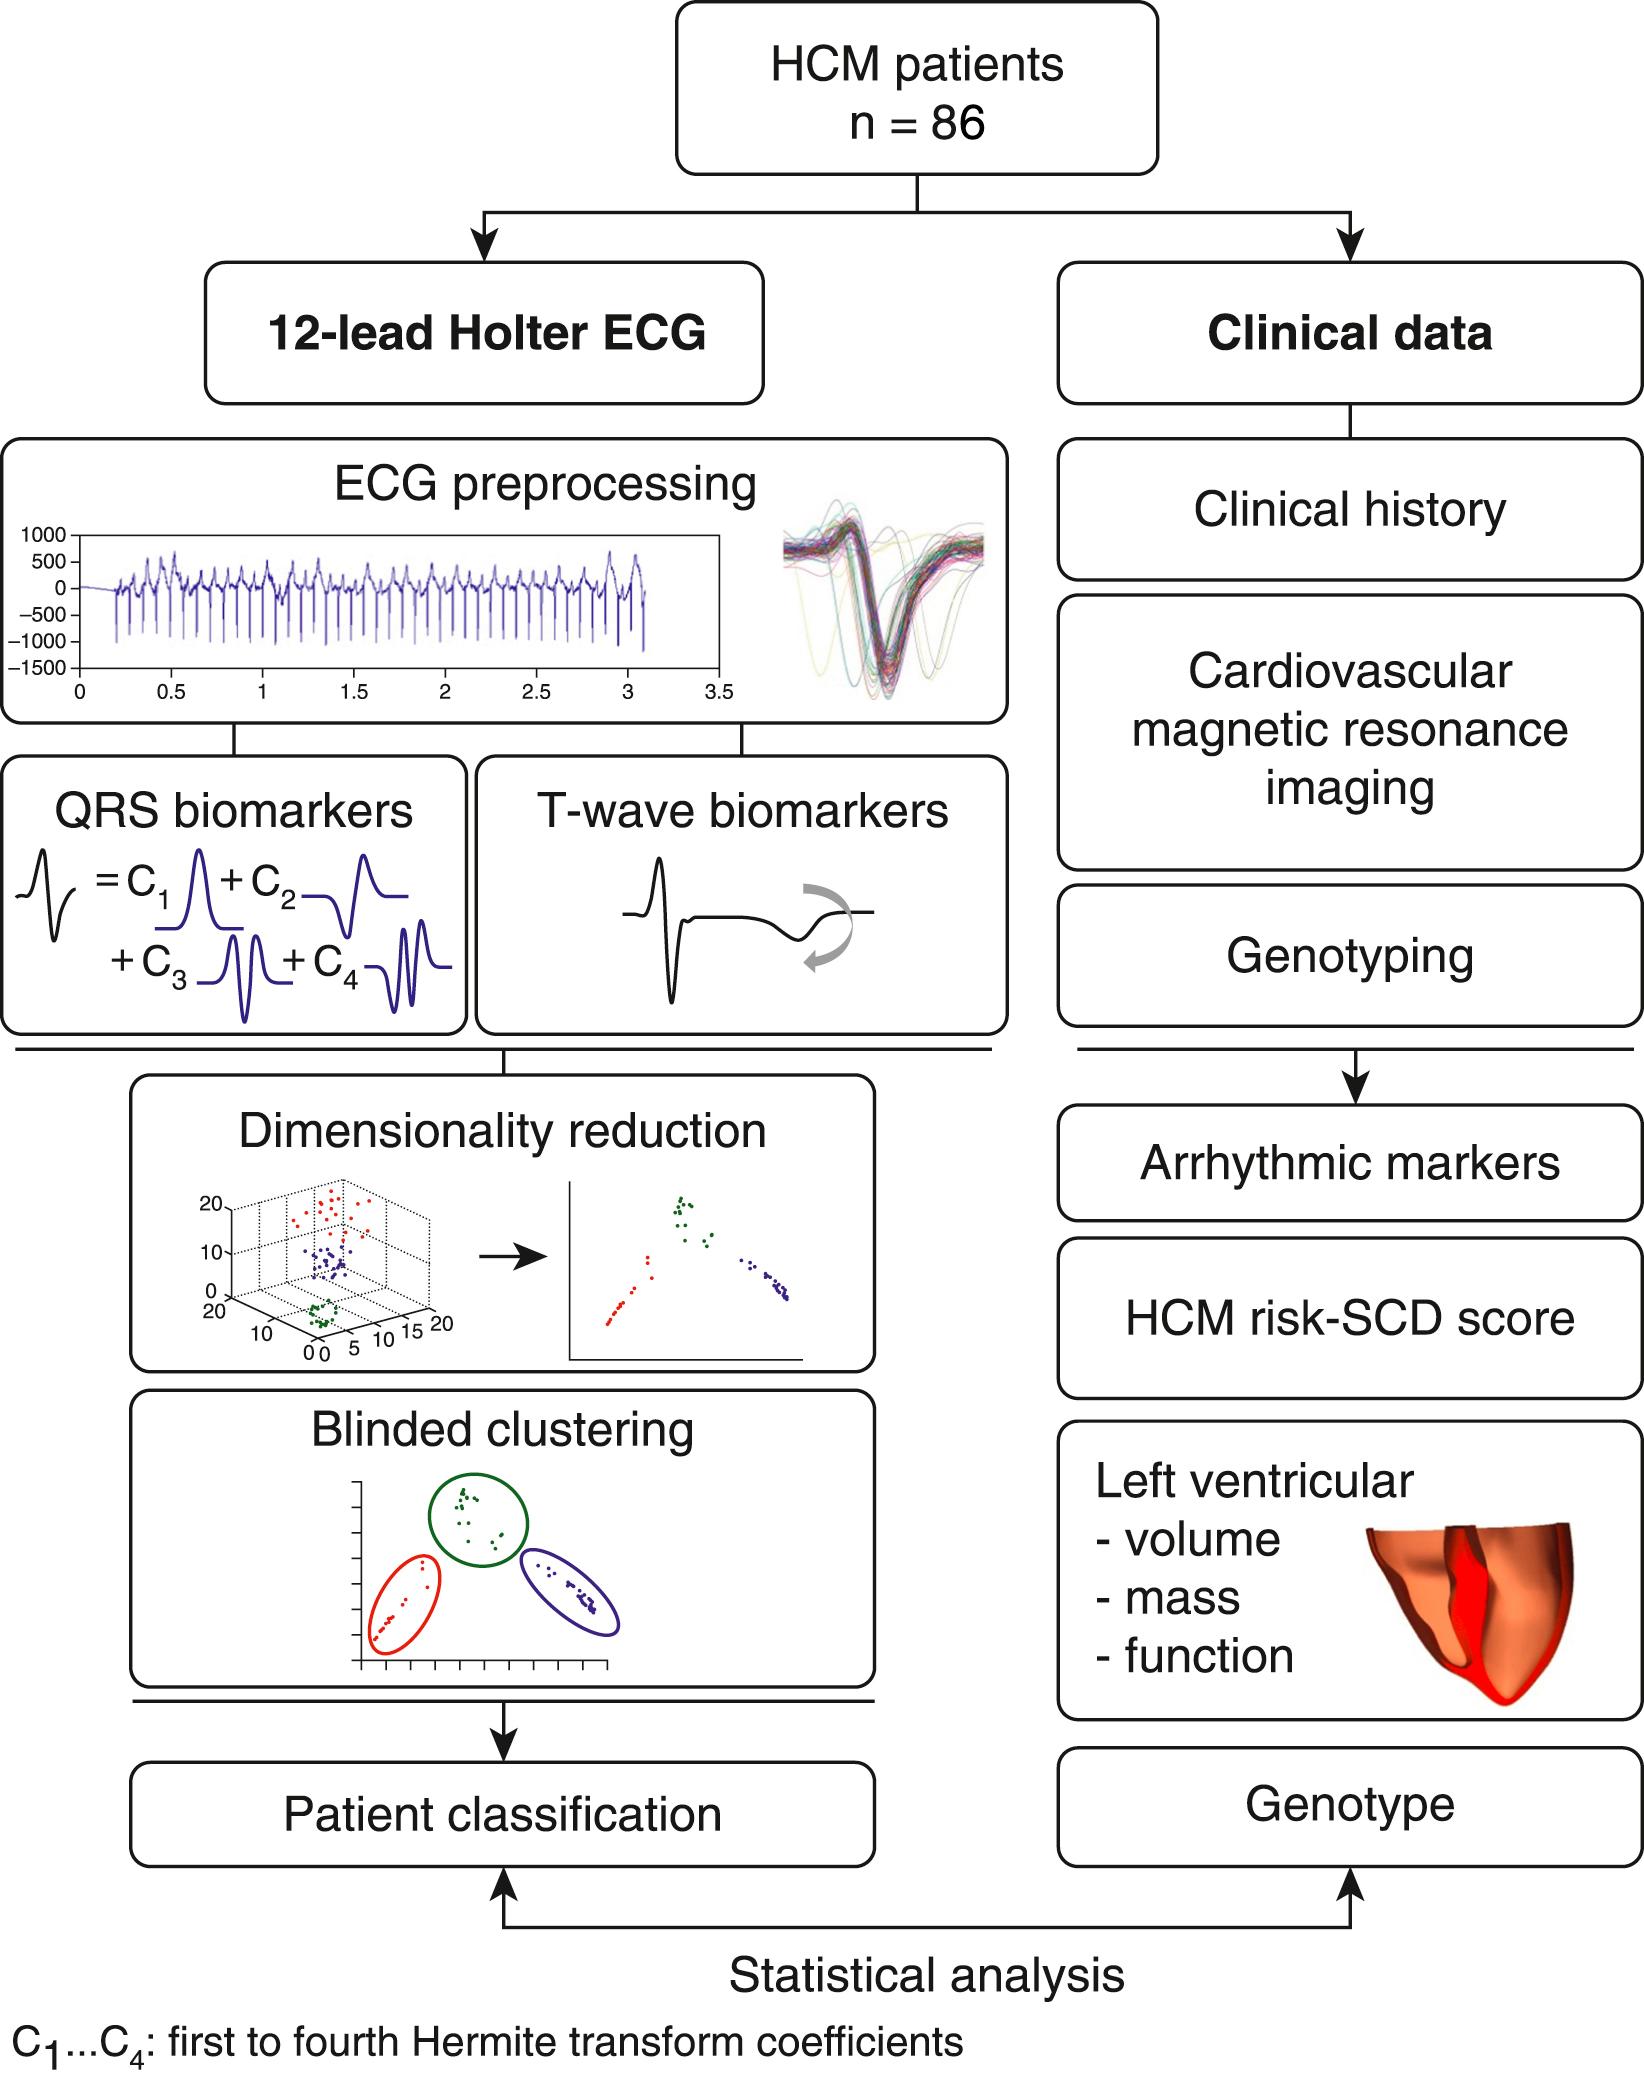 Fig. 34.1, Summary of the methodologies applied in this work for the analysis and classification of 86 hypertrophic cardiomyopathy (HCM) patient electrocardiograms (ECGs) using mathematical modeling and machine learning and the analysis of their clinical and cardiovascular magnetic resonance features. SCD, Sudden cardiac death.